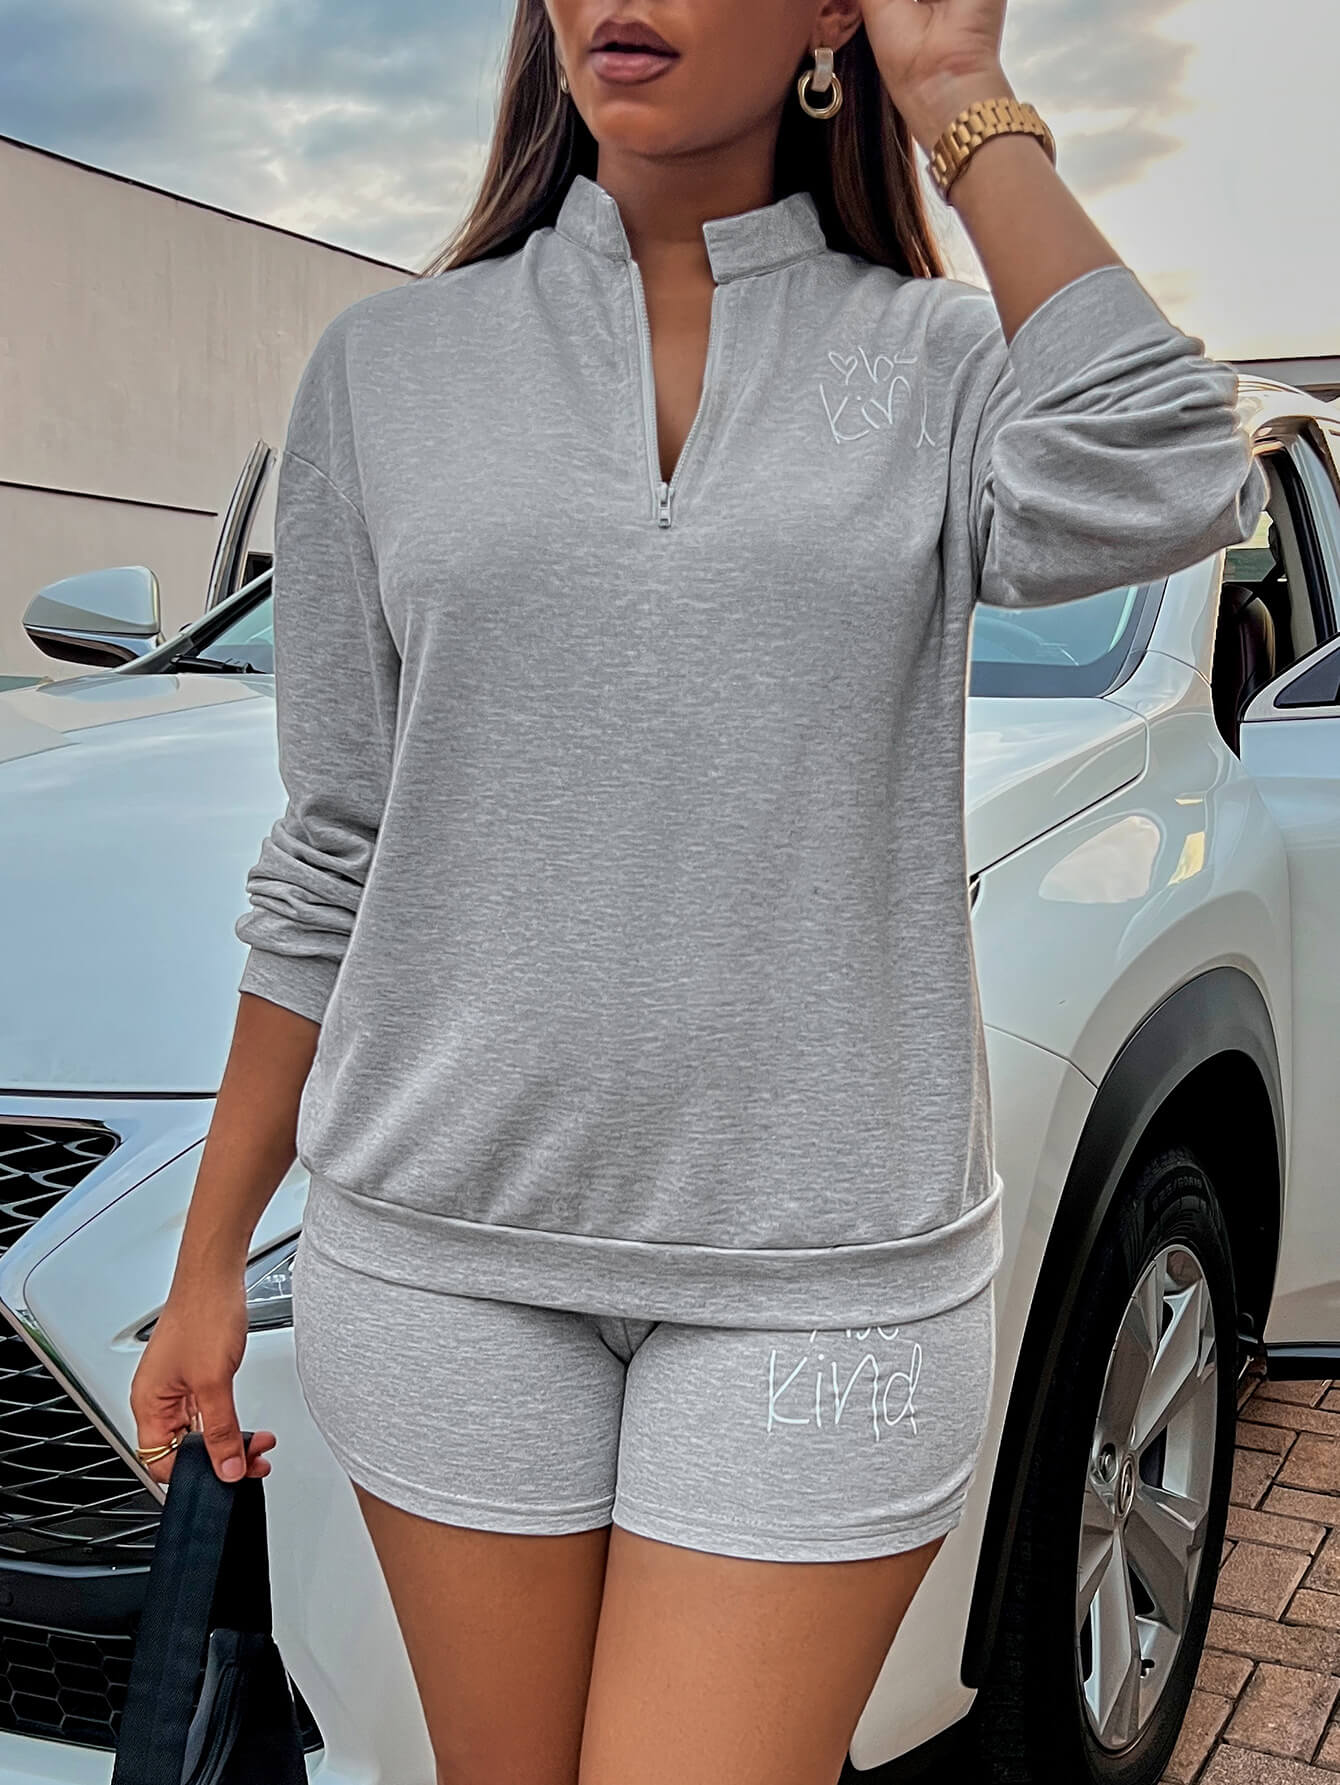 BE KIND Graphic Quarter-Zip Sweatshirt and Shorts Set  | KIKI COUTURE-Women's Clothing, Designer Fashions, Shoes, Bags